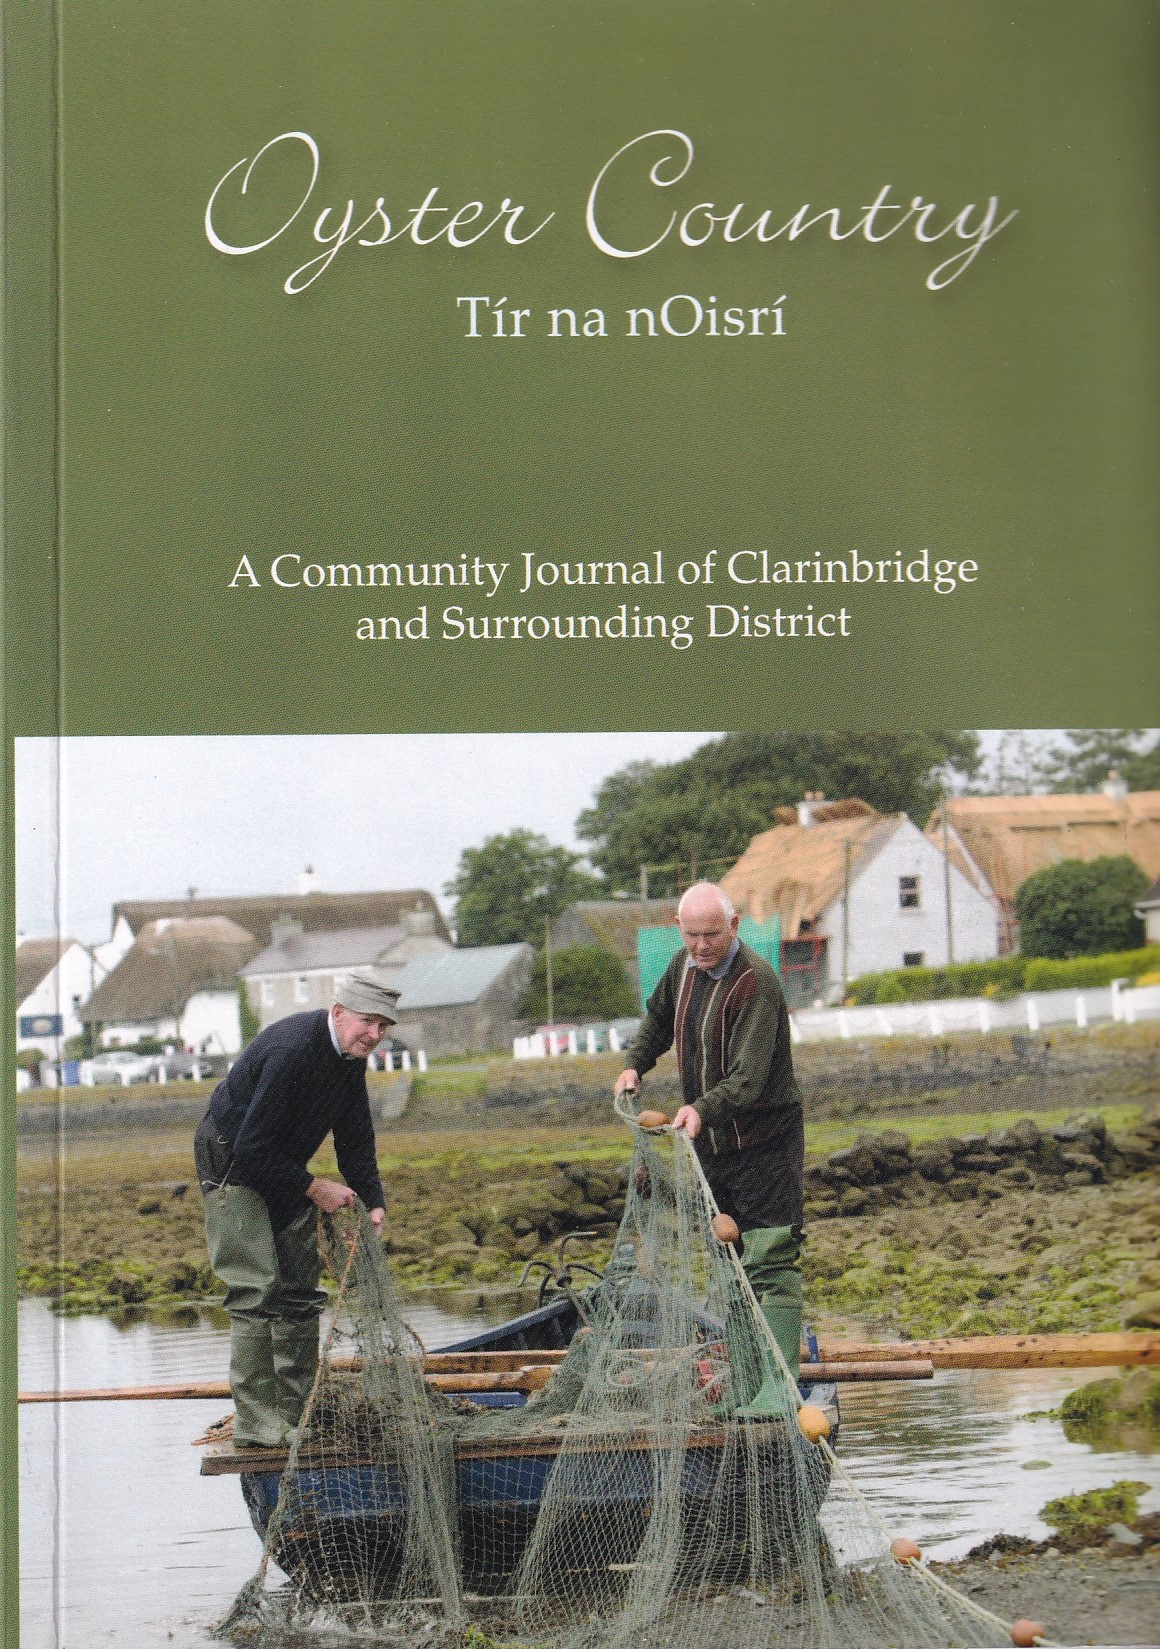 Oyster Country (Tír na nOisrí): A Community Journal of Clarinbridge and Surrounding District | Joseph Murphy | Charlie Byrne's